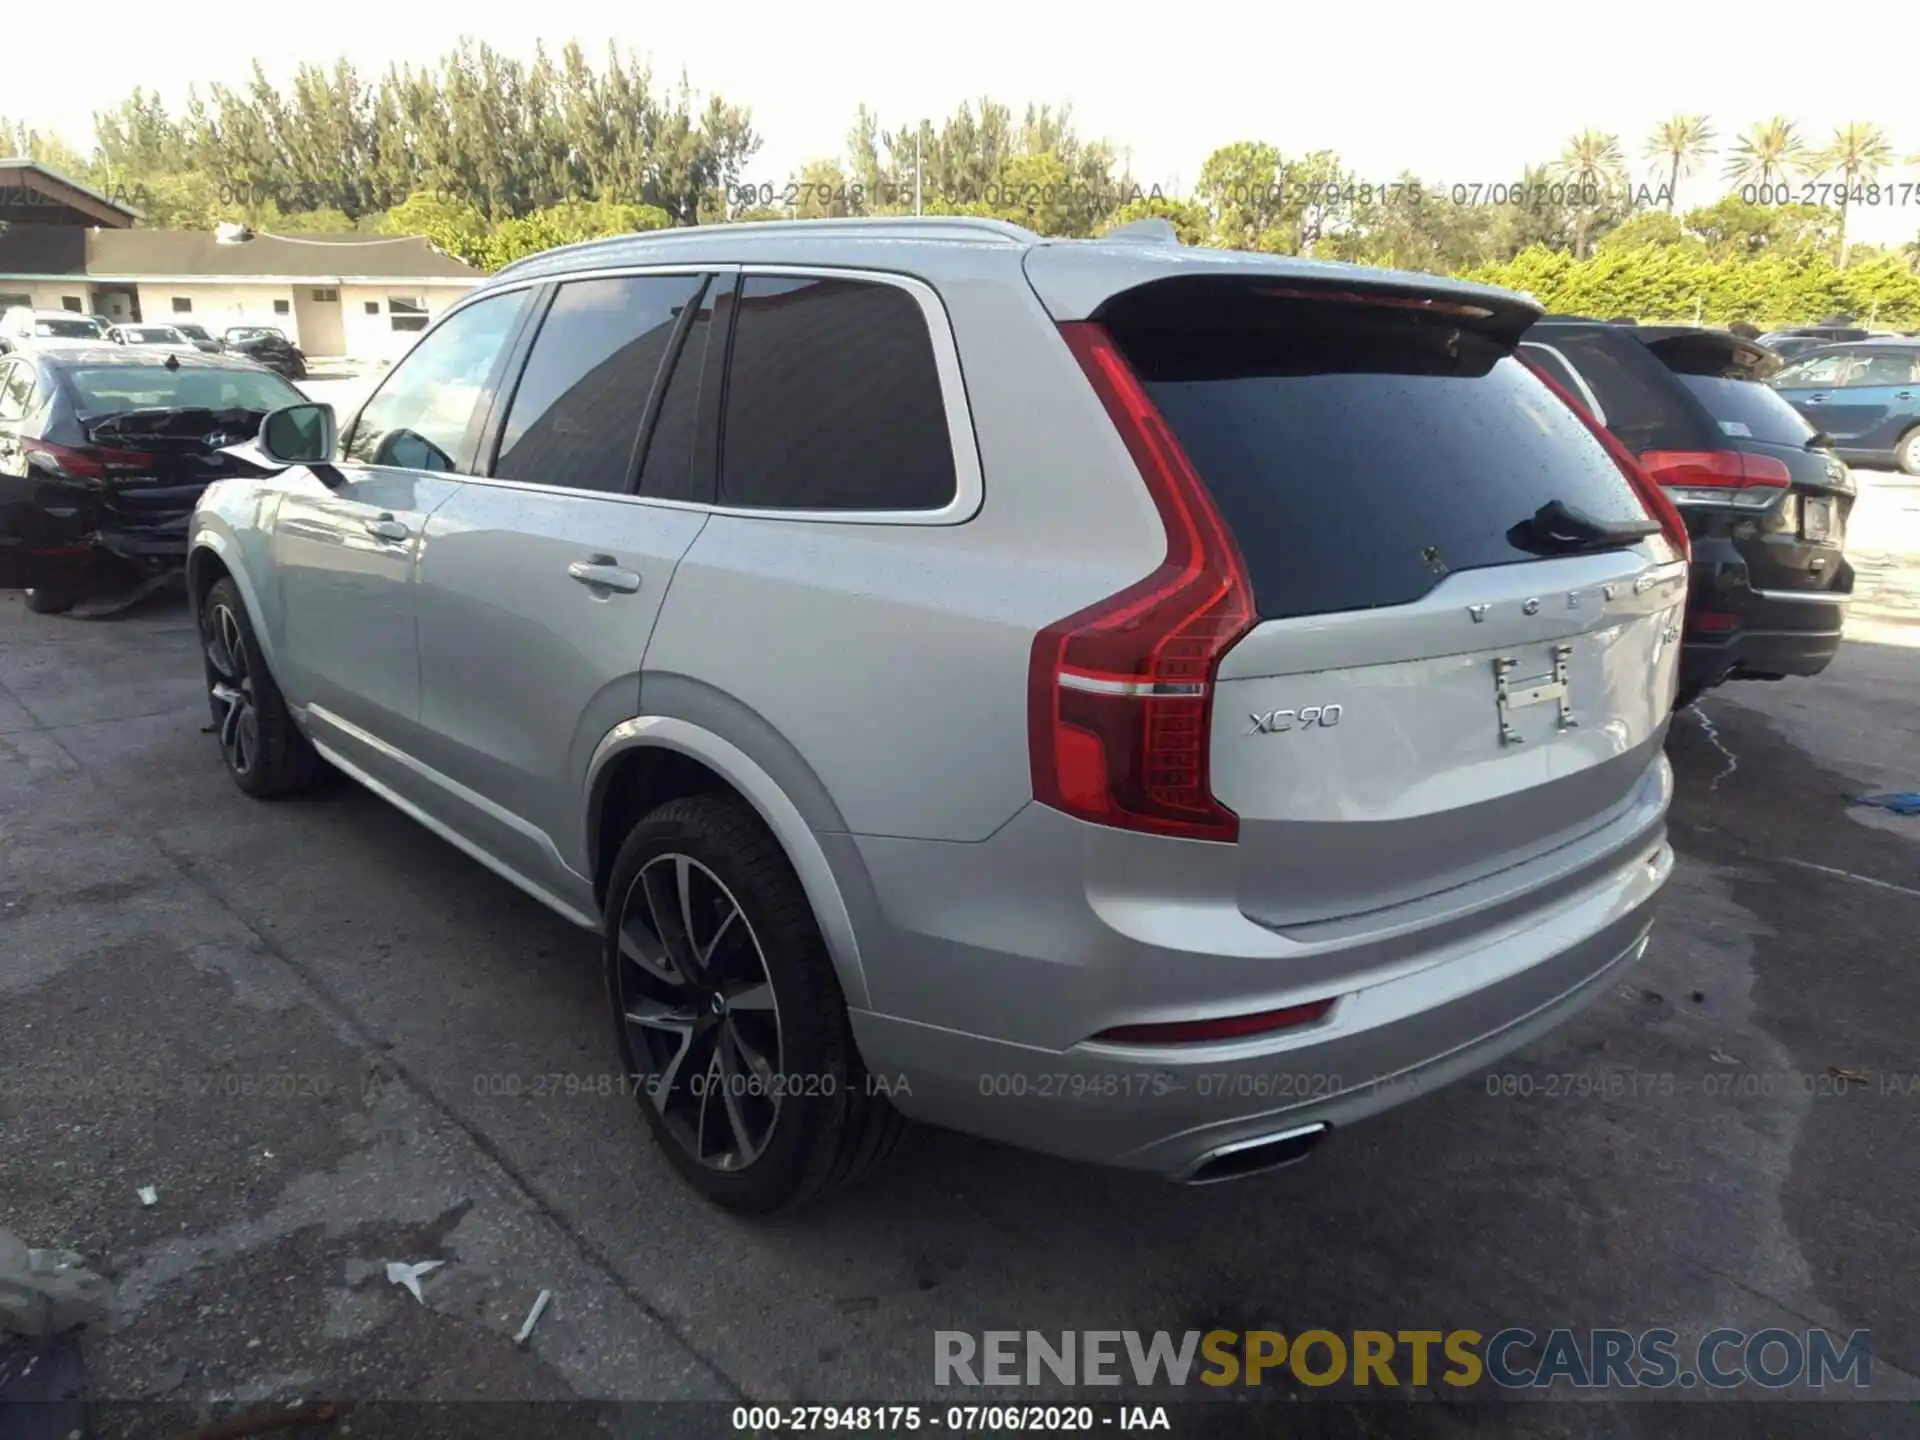 3 Photograph of a damaged car YV4A221K0L1550935 VOLVO XC90 2020